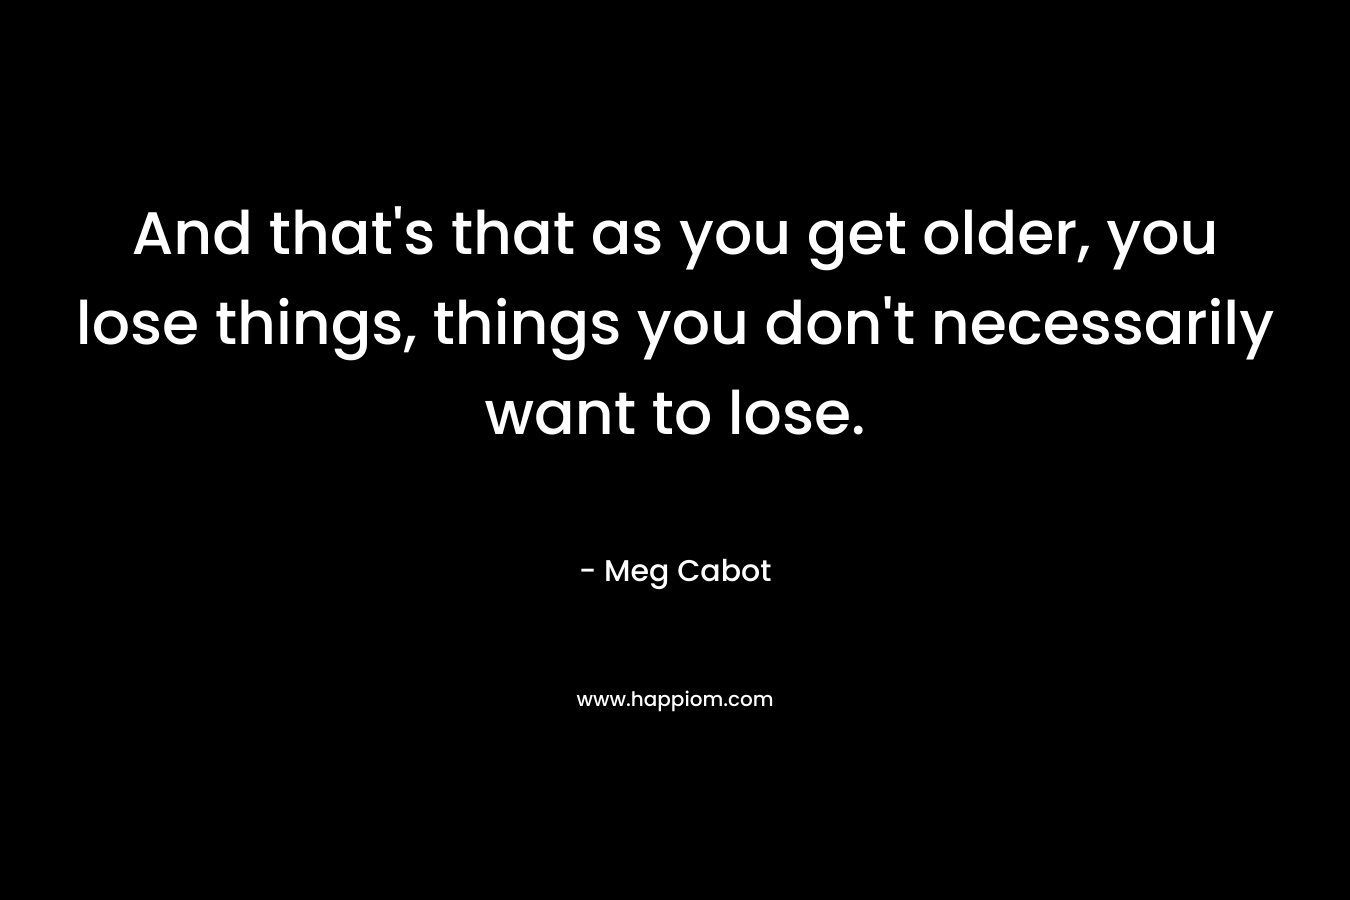 And that's that as you get older, you lose things, things you don't necessarily want to lose.